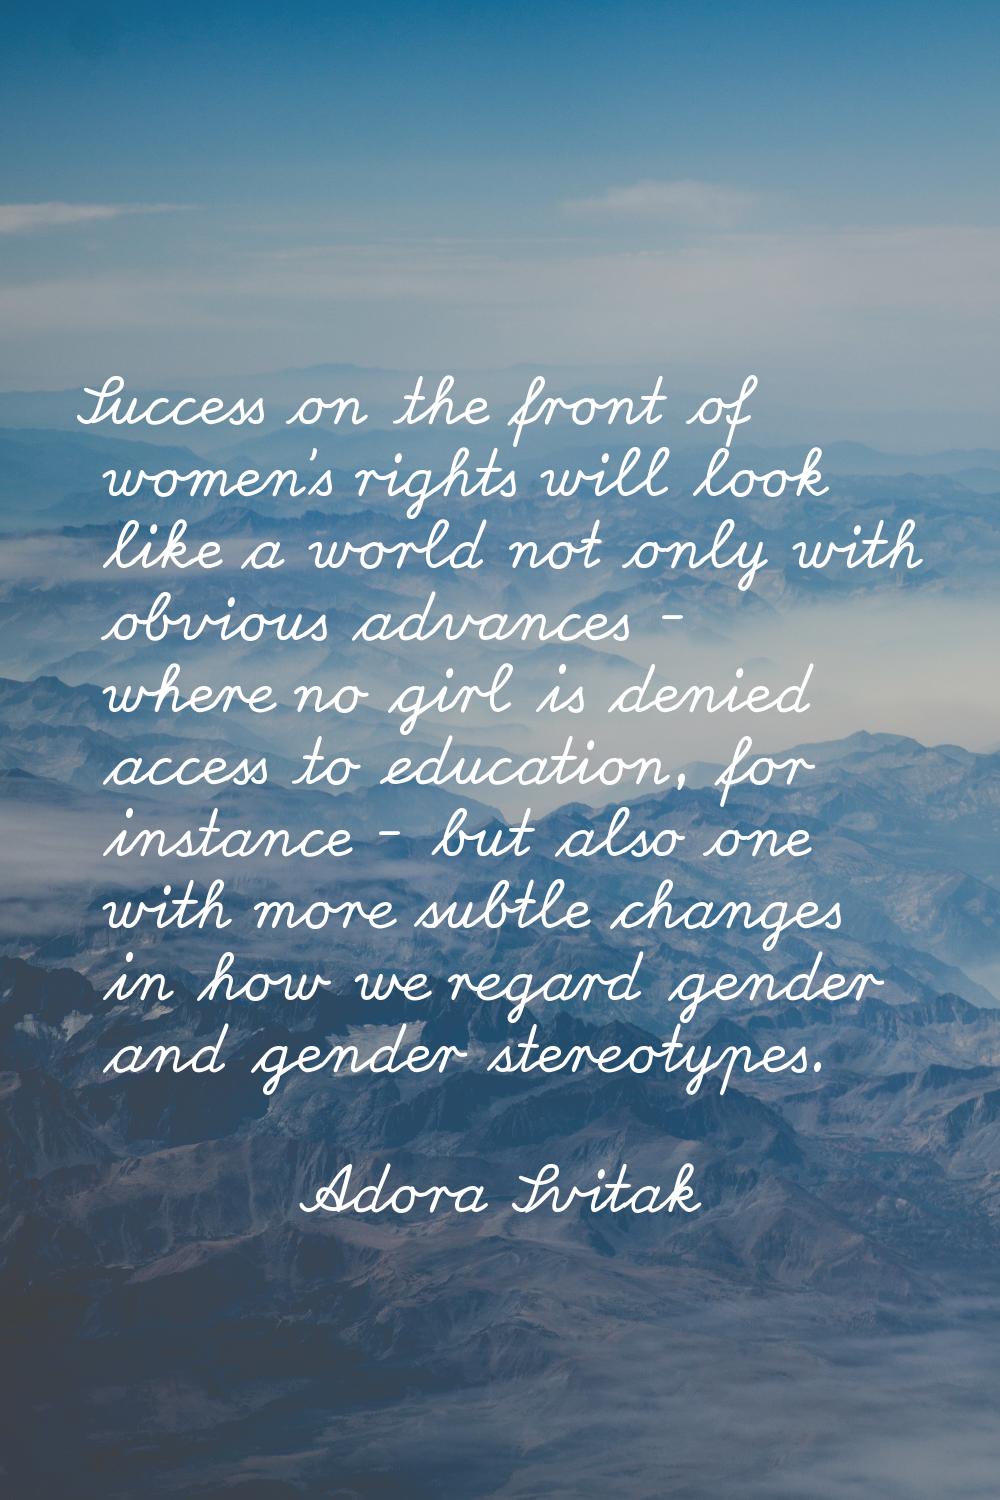 Success on the front of women's rights will look like a world not only with obvious advances - wher